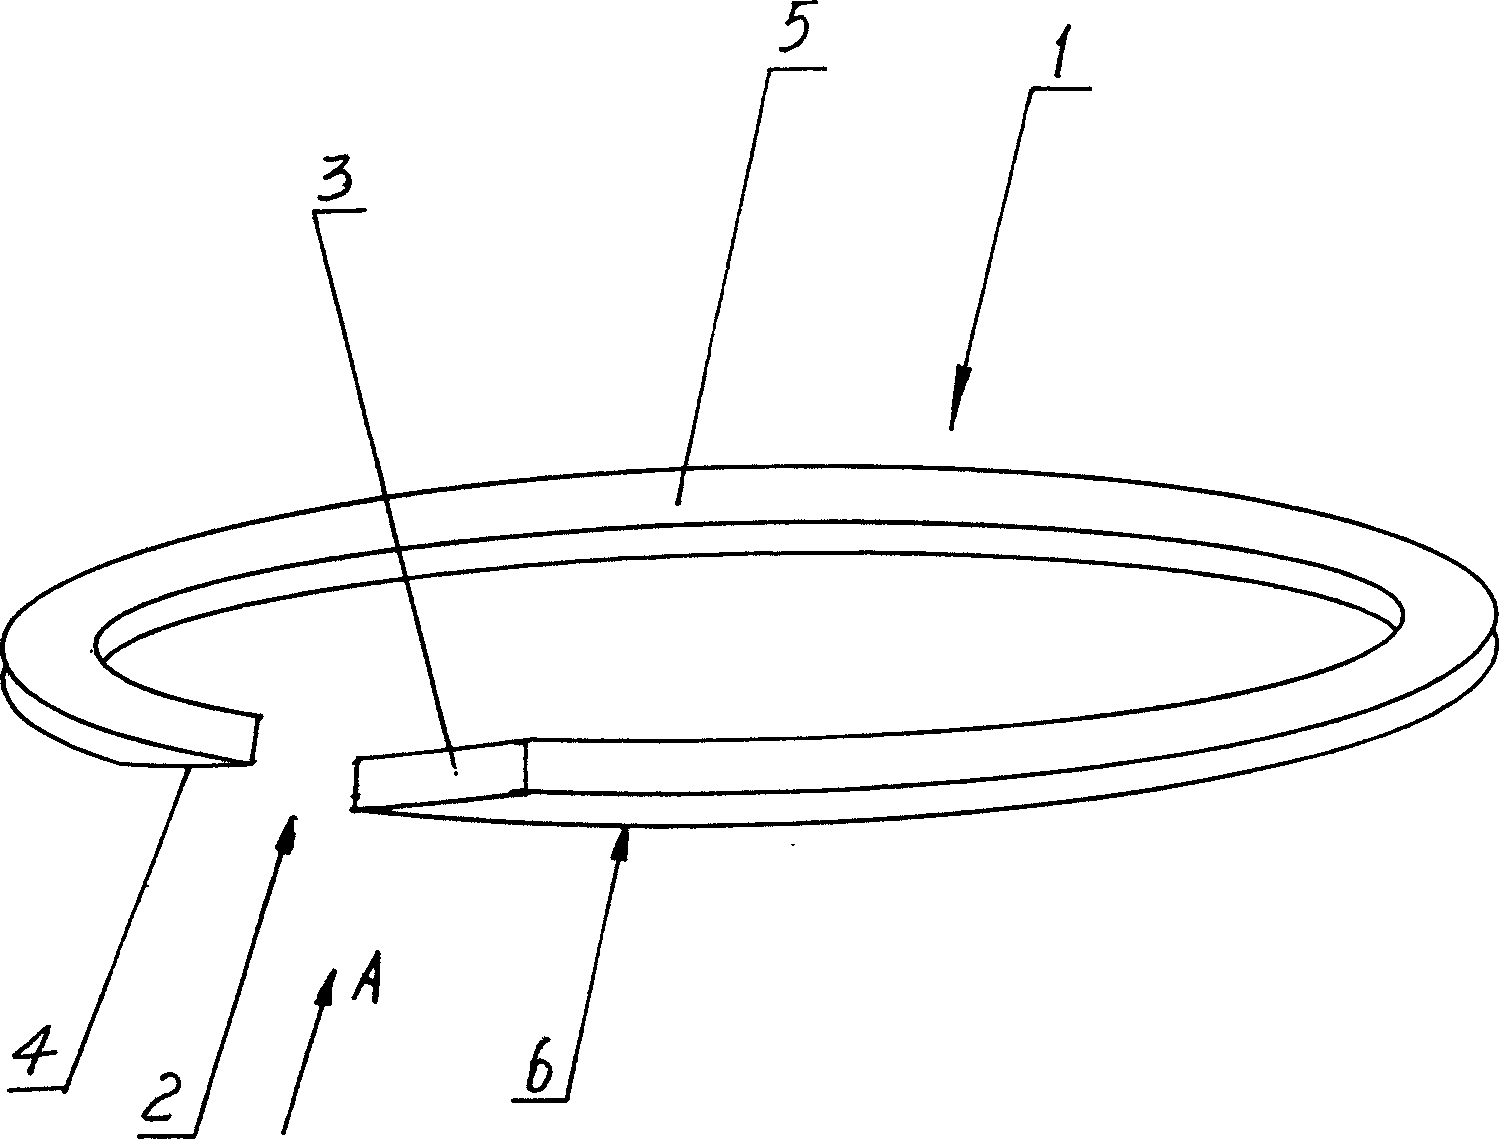 Piston ring for automatically closing and adjusting clearance